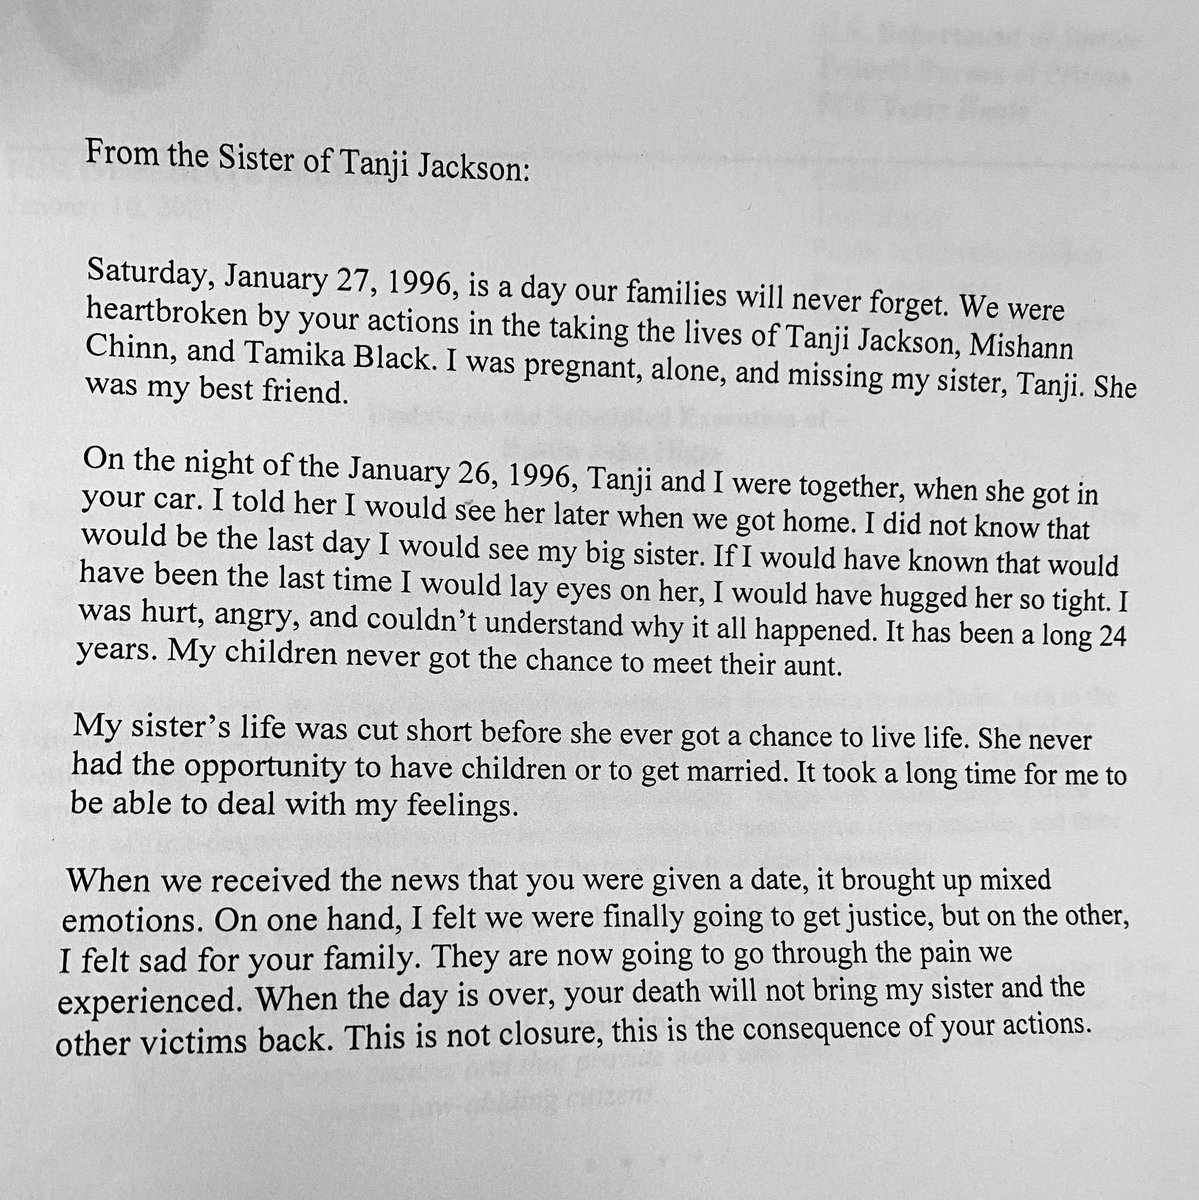 Written statement from the sister of Tanji Jackson. It addresses Dustin. “When we received the news that you were given a date, it brought up mixed emotions. On one hand, I felt we were finally going to get justice, but on the other, I felt sad for your family.”